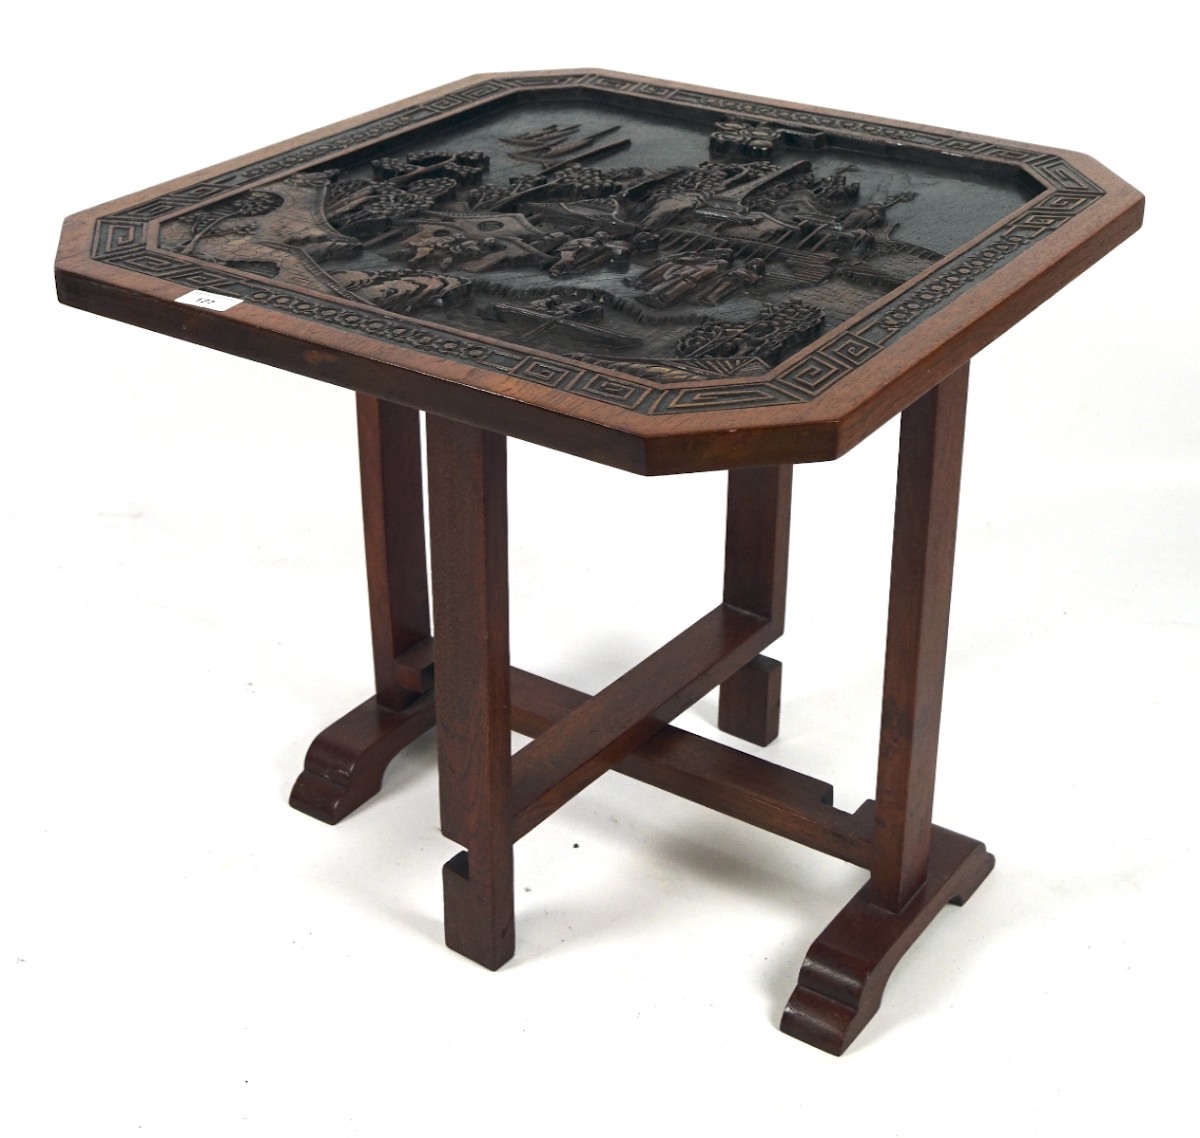 A 20th century Chinese style wooden gateleg table,